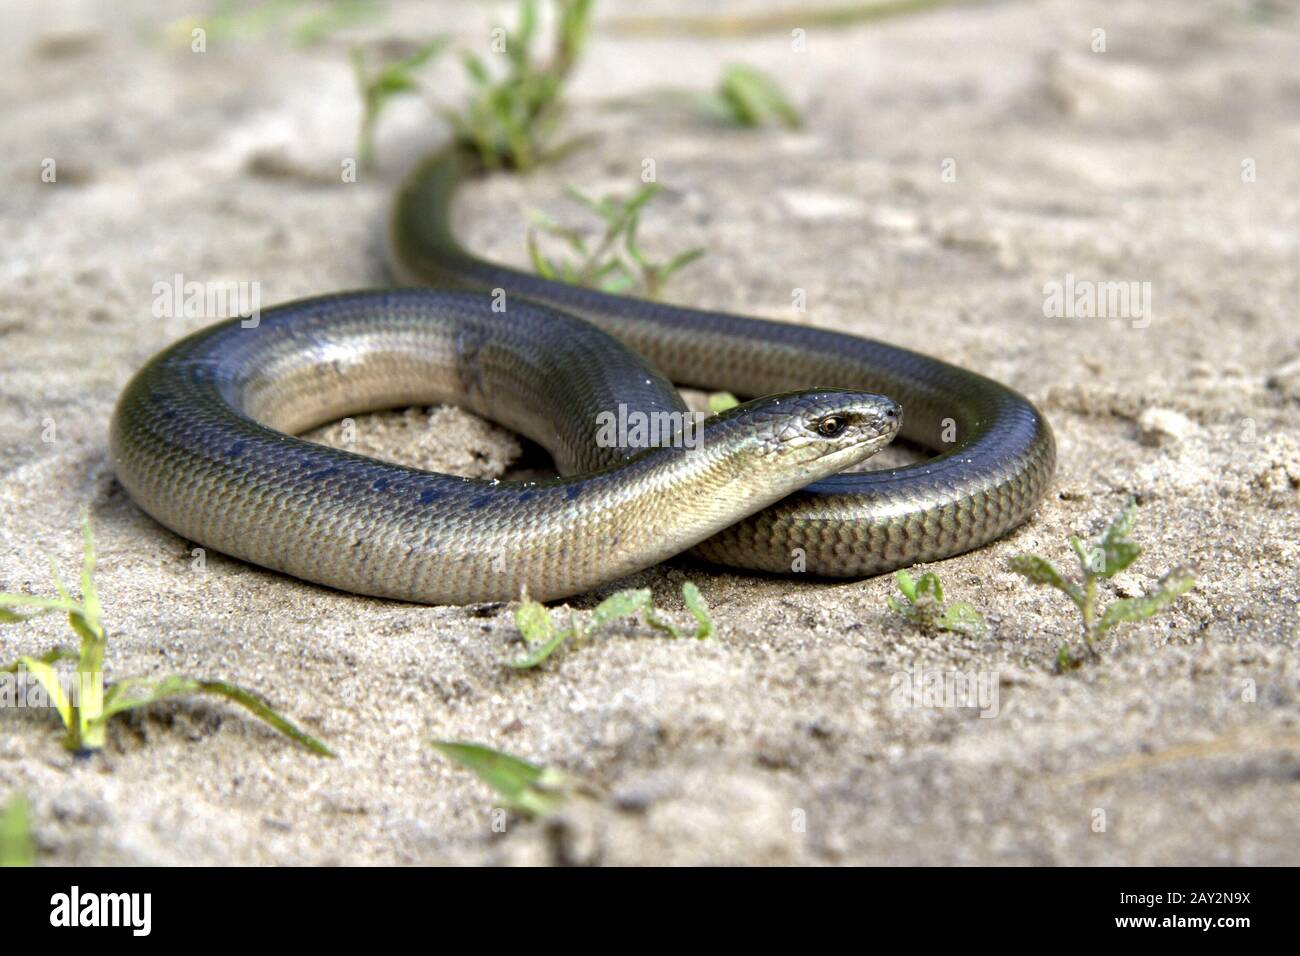 Legless lizard Slow Worm lying on the sand on the edge of the forest. Stock Photo